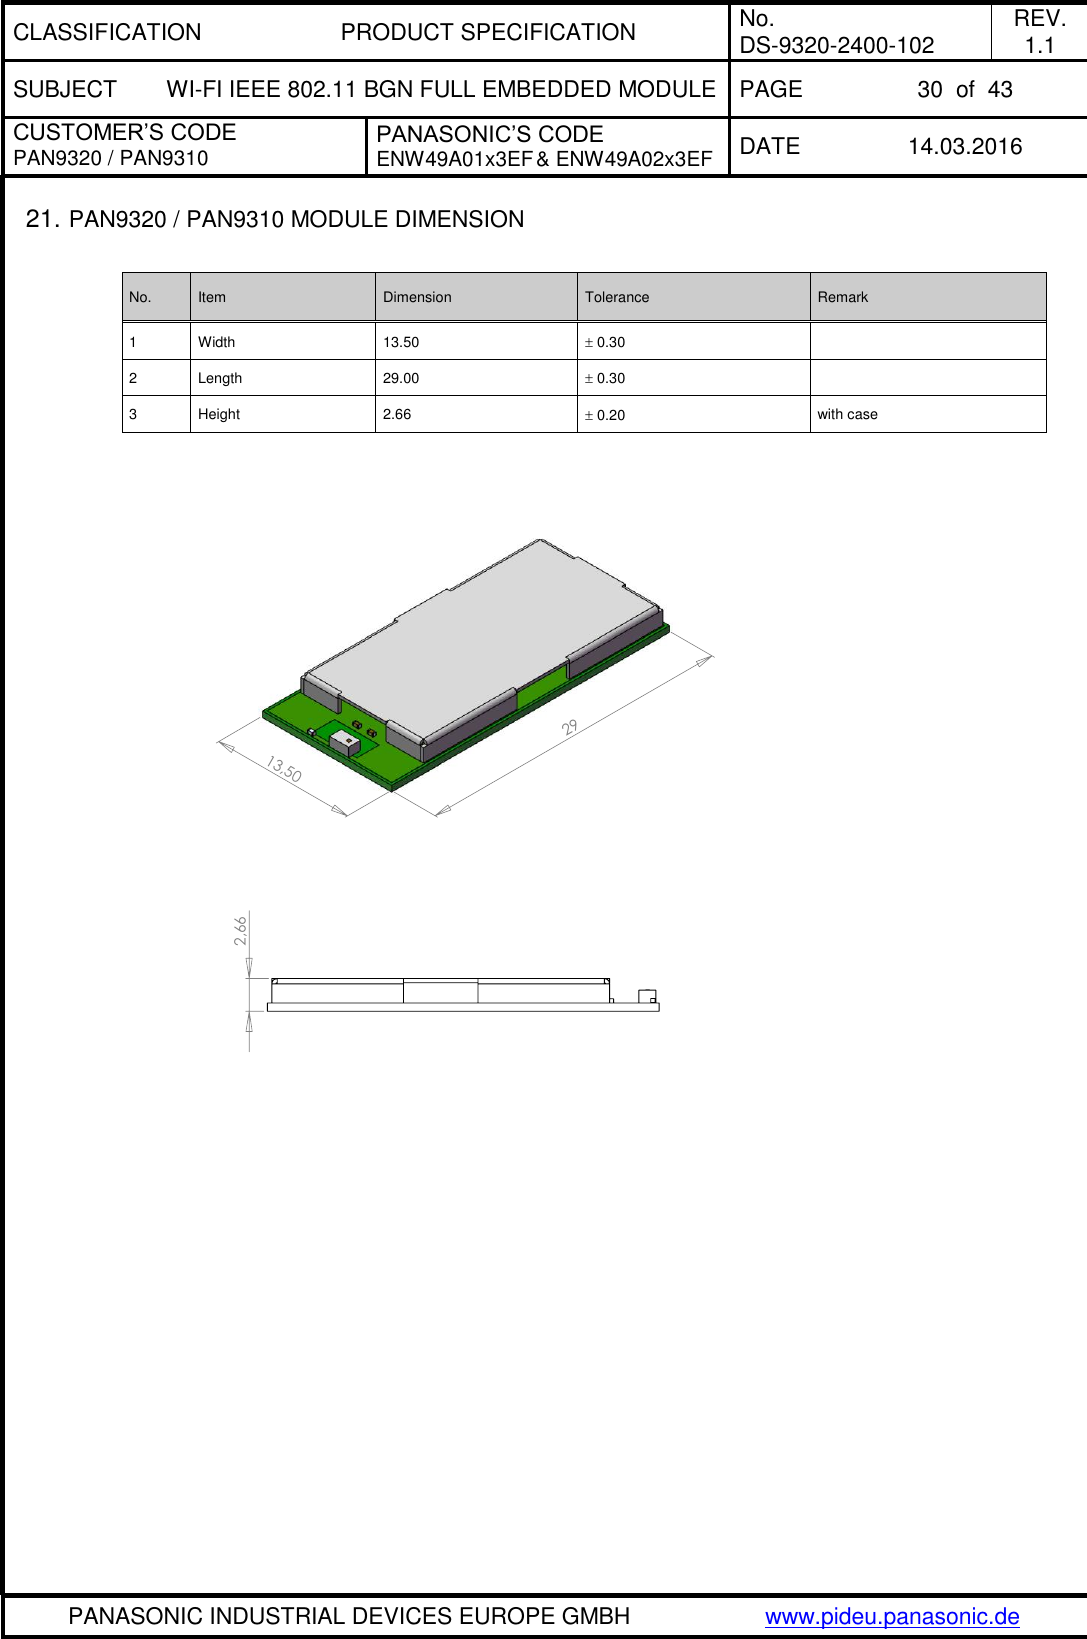 CLASSIFICATION PRODUCT SPECIFICATION No. DS-9320-2400-102 REV. 1.1 SUBJECT WI-FI IEEE 802.11 BGN FULL EMBEDDED MODULE PAGE 30  of  43 CUSTOMER’S CODE PAN9320 / PAN9310 PANASONIC’S CODE ENW49A01x3EF &amp; ENW49A02x3EF DATE 14.03.2016   PANASONIC INDUSTRIAL DEVICES EUROPE GMBH www.pideu.panasonic.de  2913,502,6621. PAN9320 / PAN9310 MODULE DIMENSION  No. Item Dimension Tolerance Remark 1 Width 13.50  0.30  2 Length 29.00  0.30  3 Height 2.66  0.20 with case                    